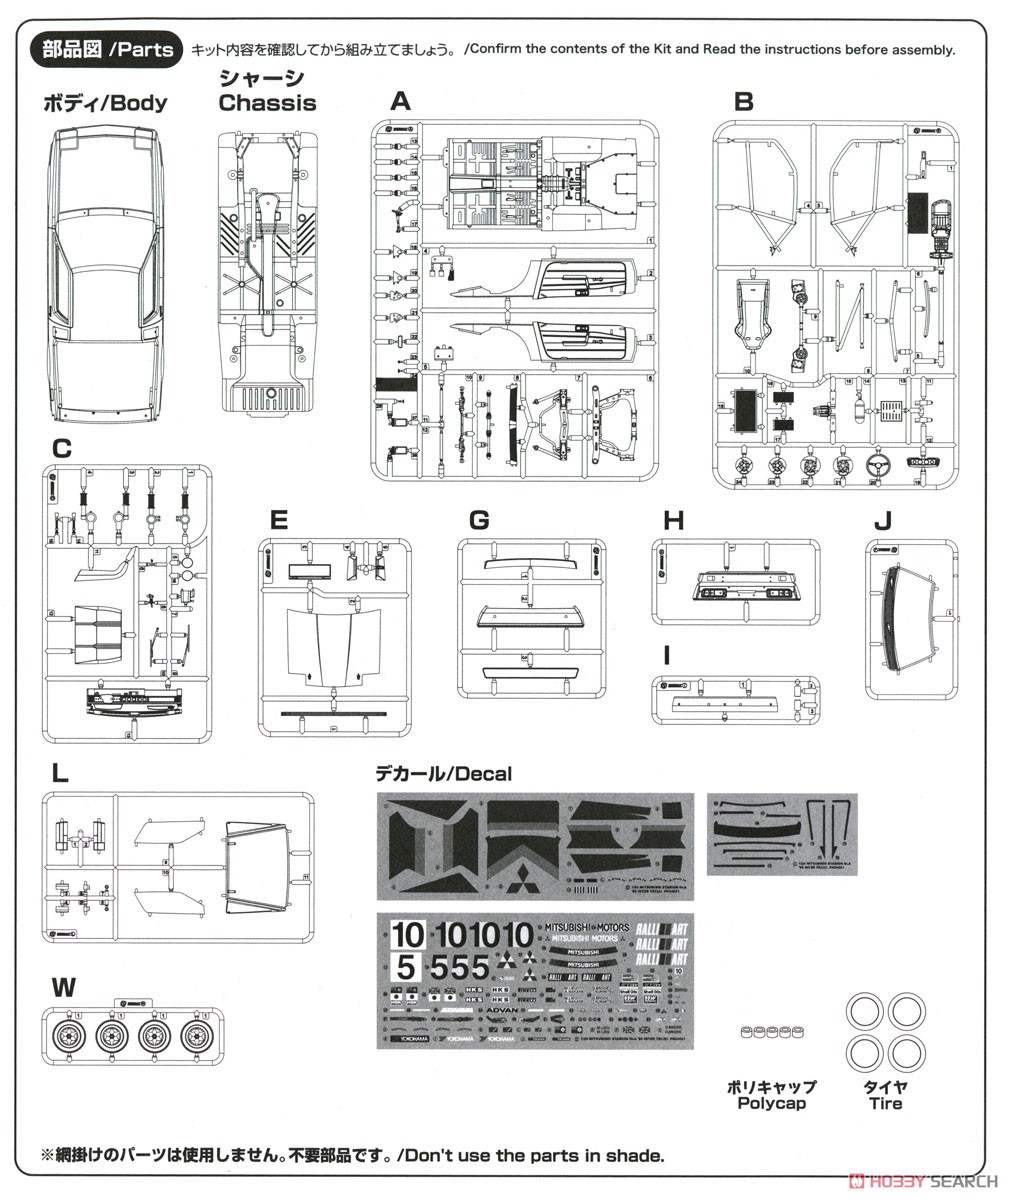 1/24 Racing Series Mitsubishi Starion Gr.A 1985 InterTEC in FISCO(Fuji International Speedway) (Model Car) Assembly guide6